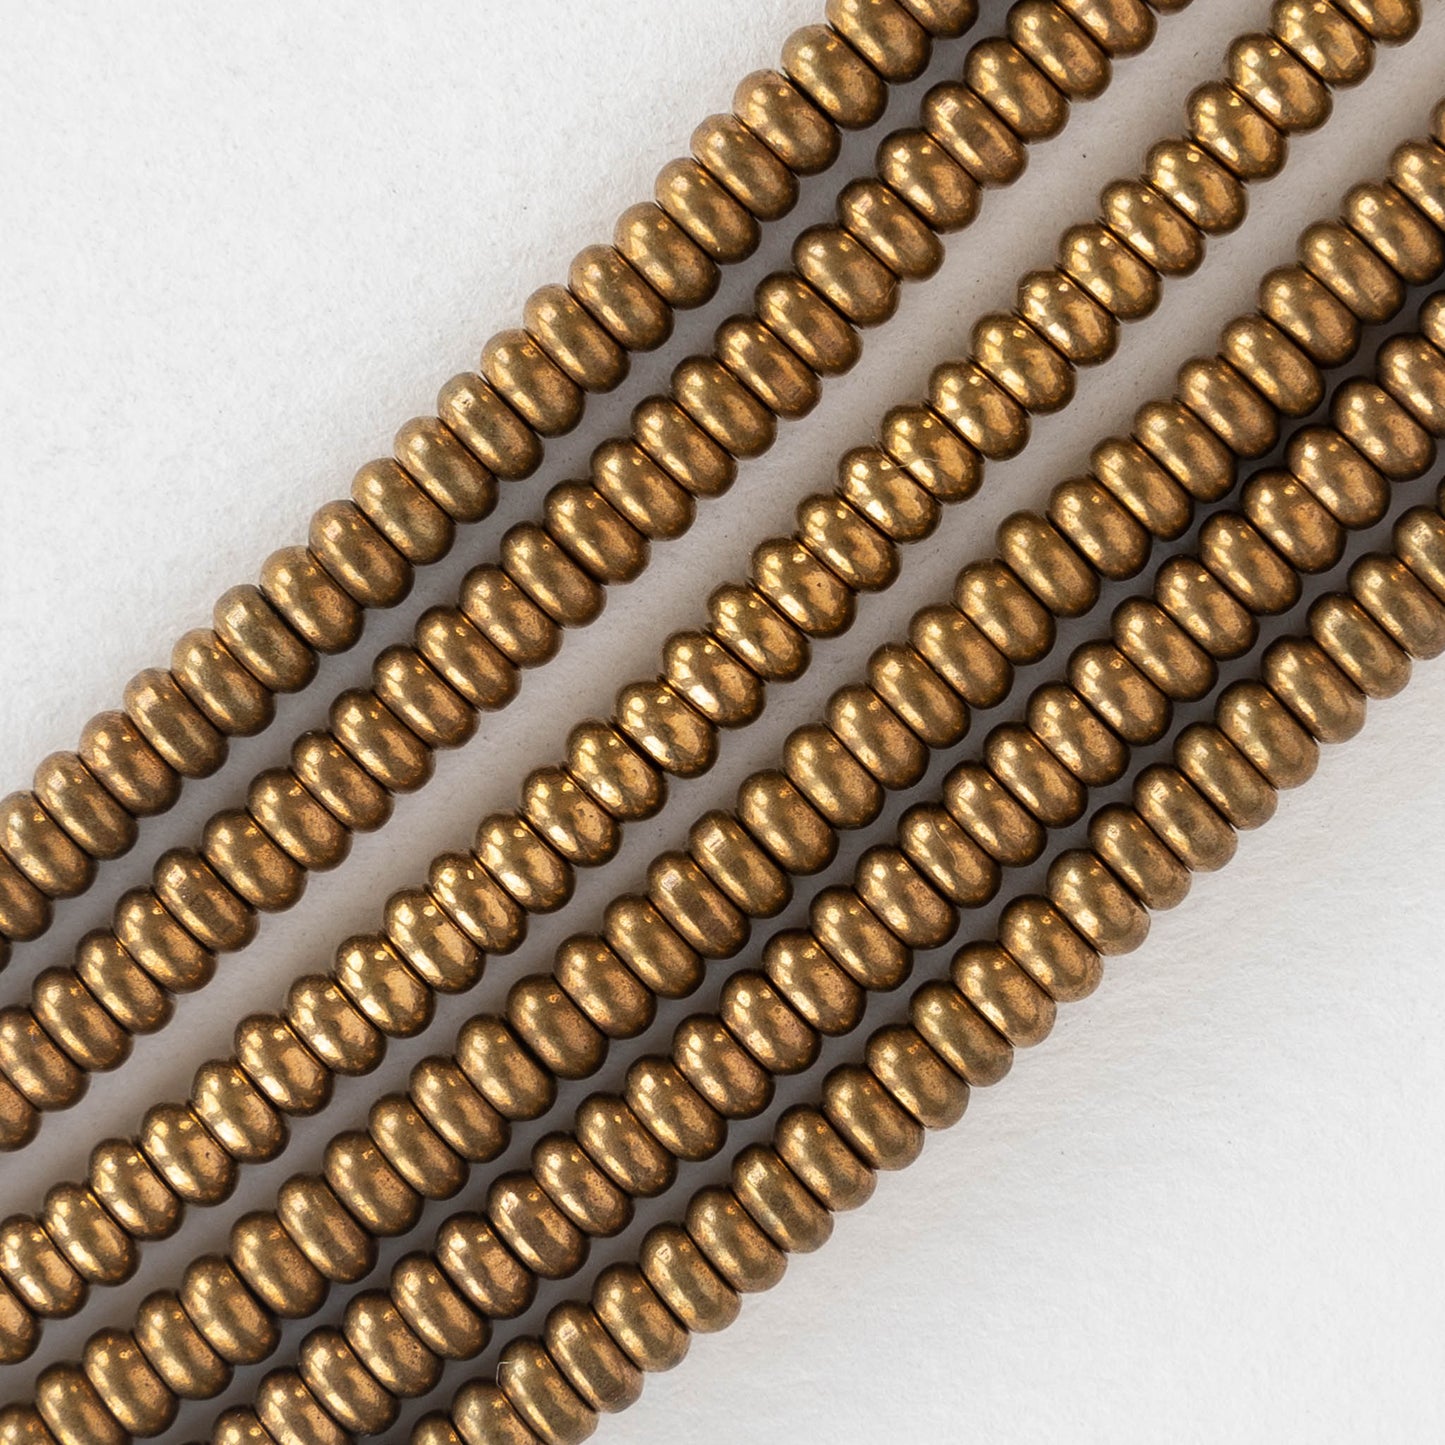 2x4mm Antique Gold Plated Brass Rondelle Beads - 50